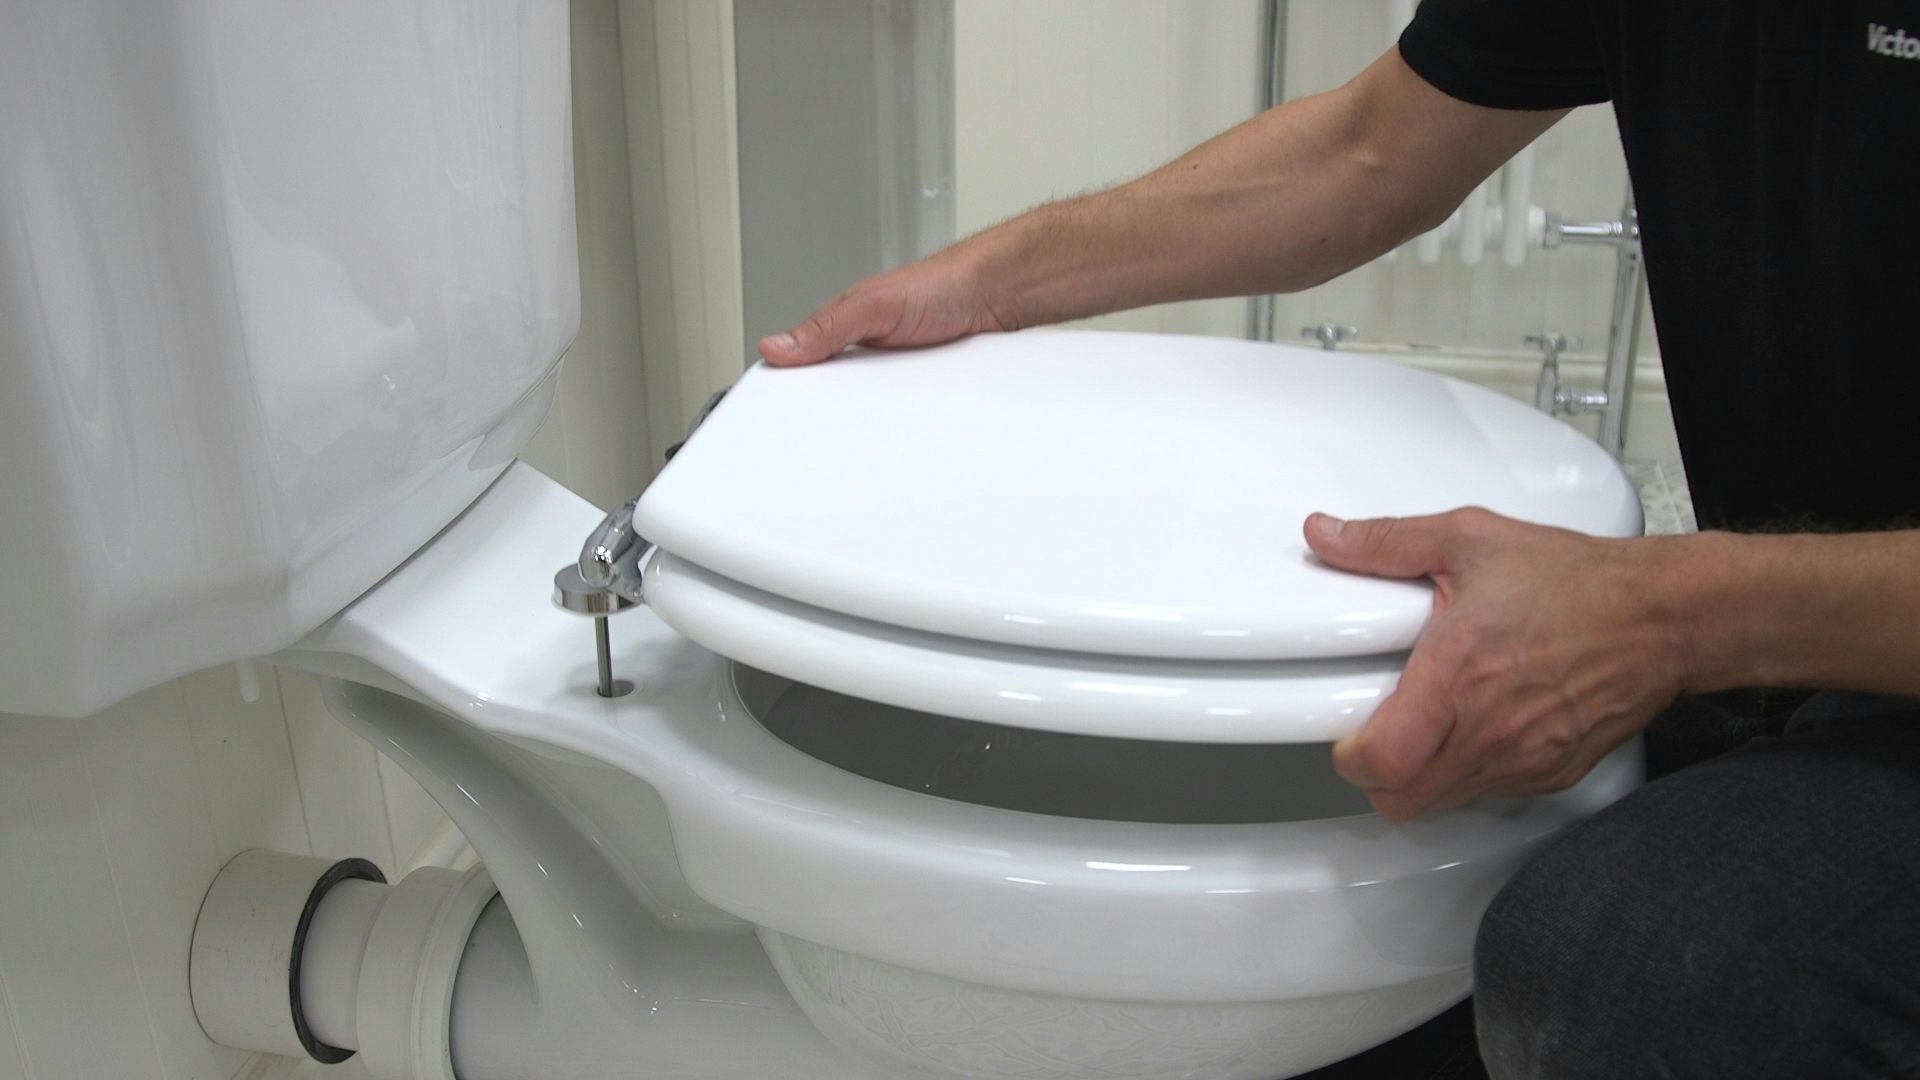 Fitting a new toilet seat